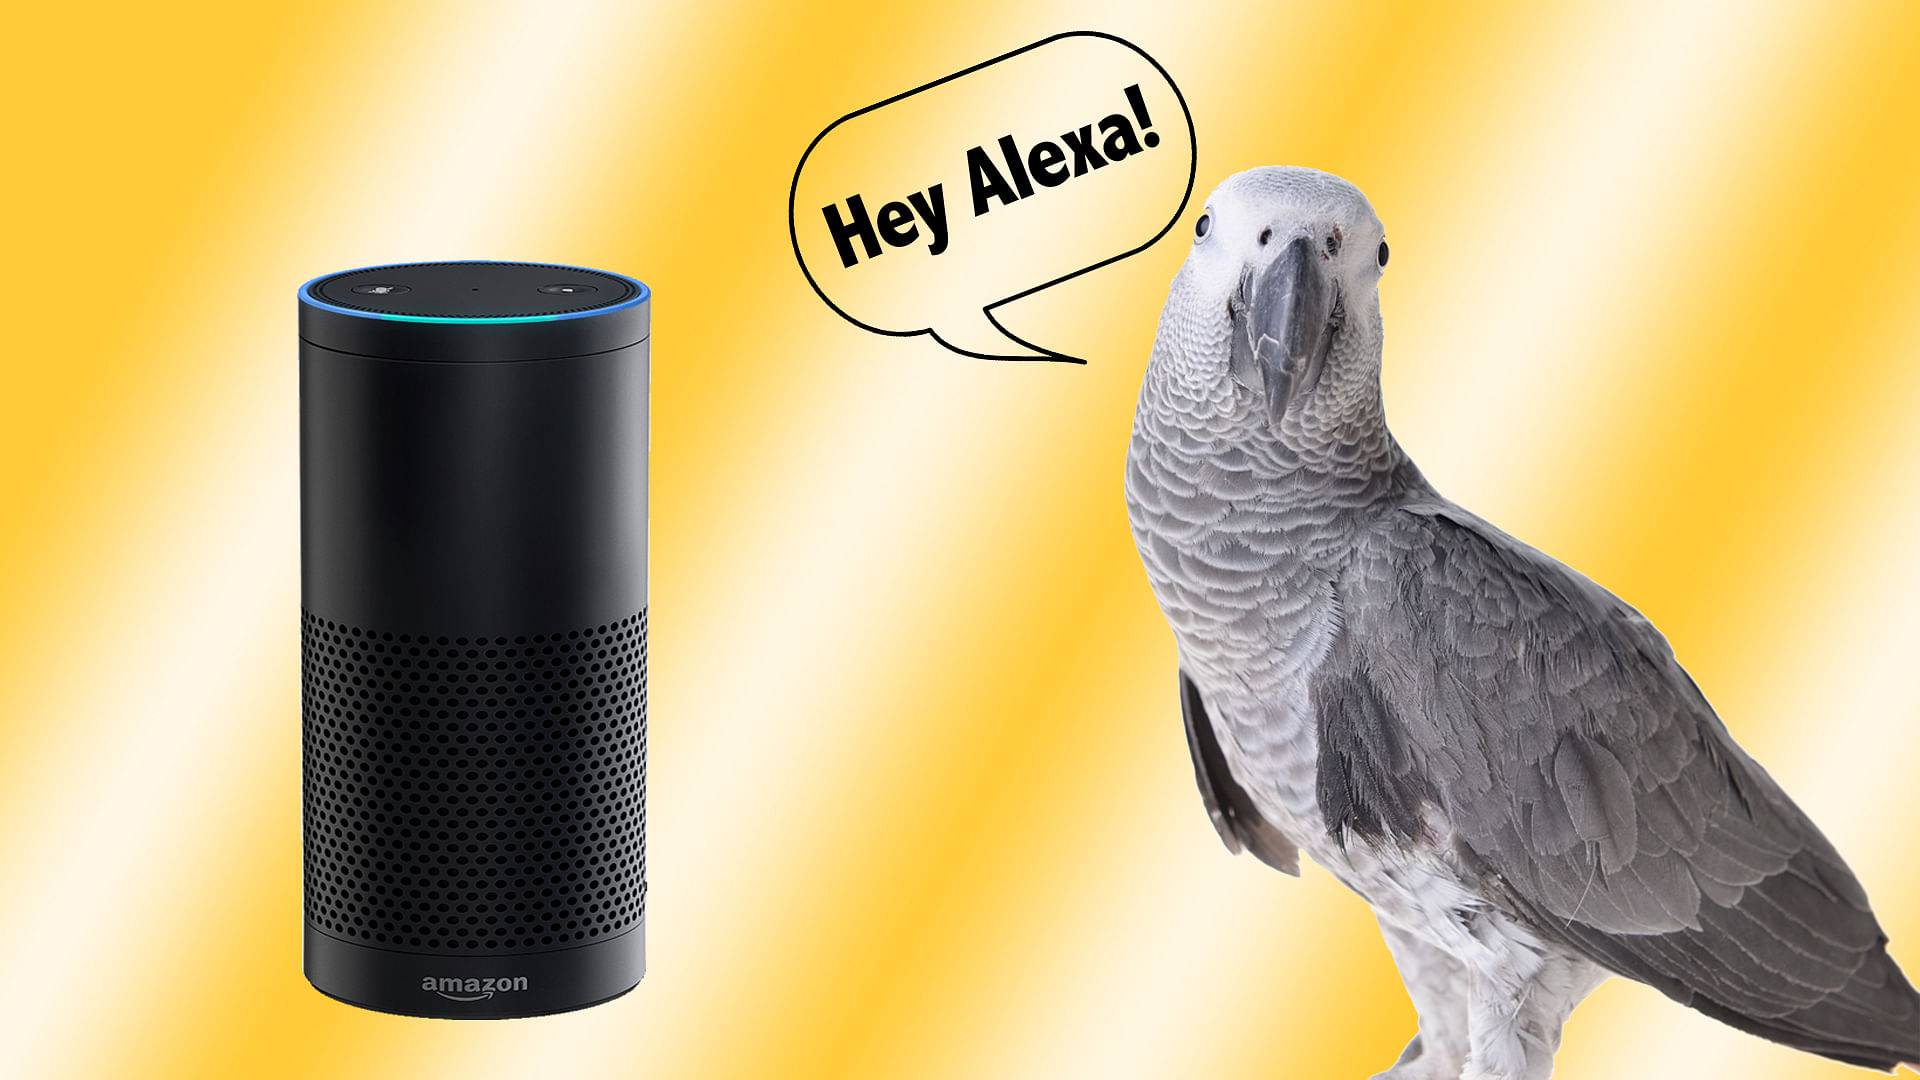 Rocco, the African Grey parrot, has quite a rapport with Alexa.&nbsp;